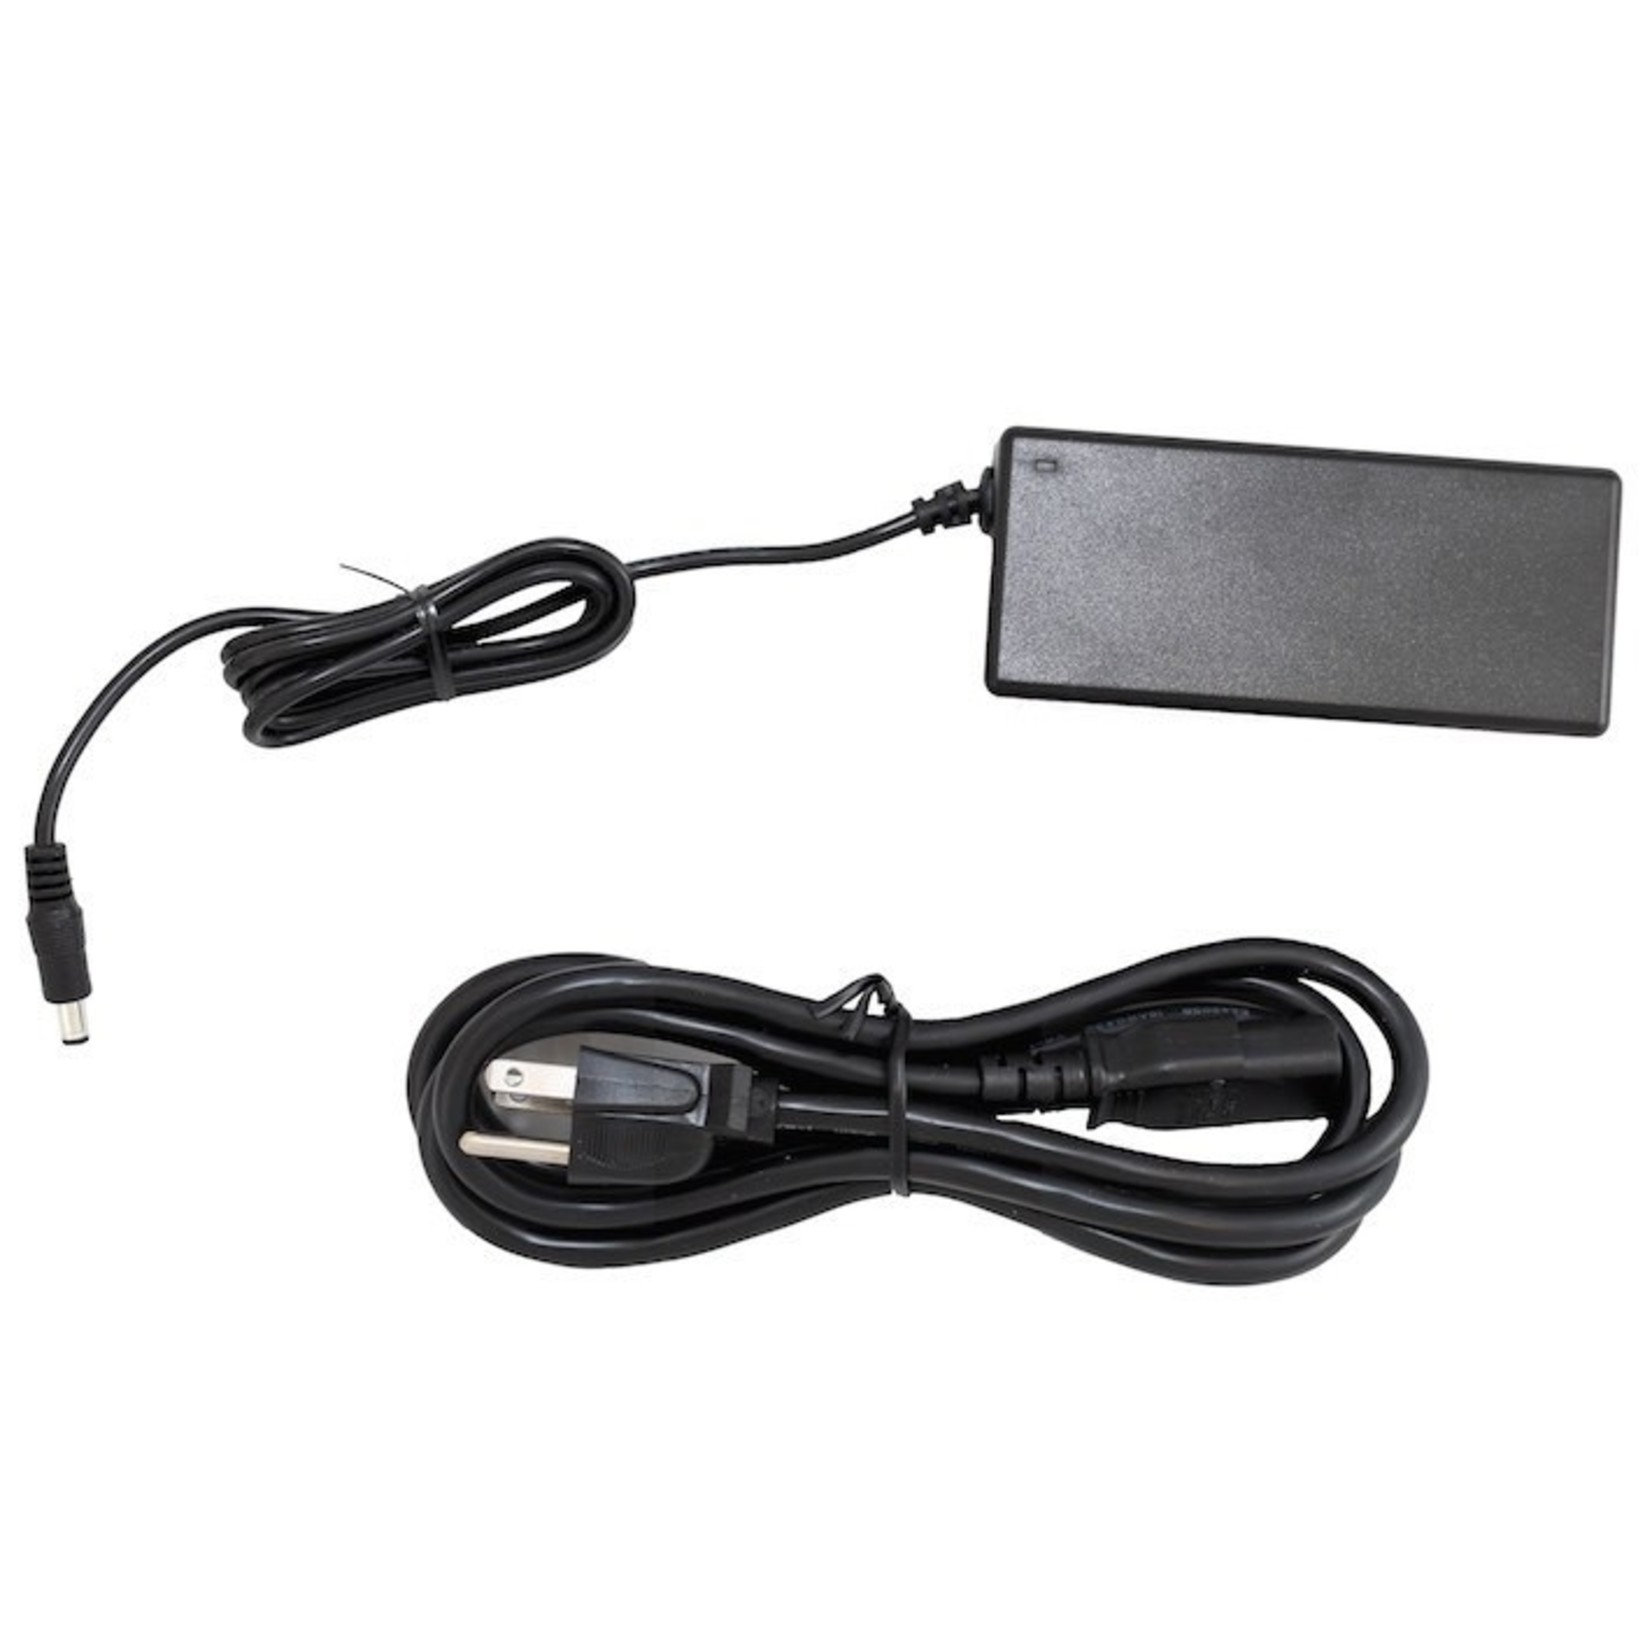 Wahoo Wahoo KICKR Replacement Power Supply - For KICKR / CORE / SNAP